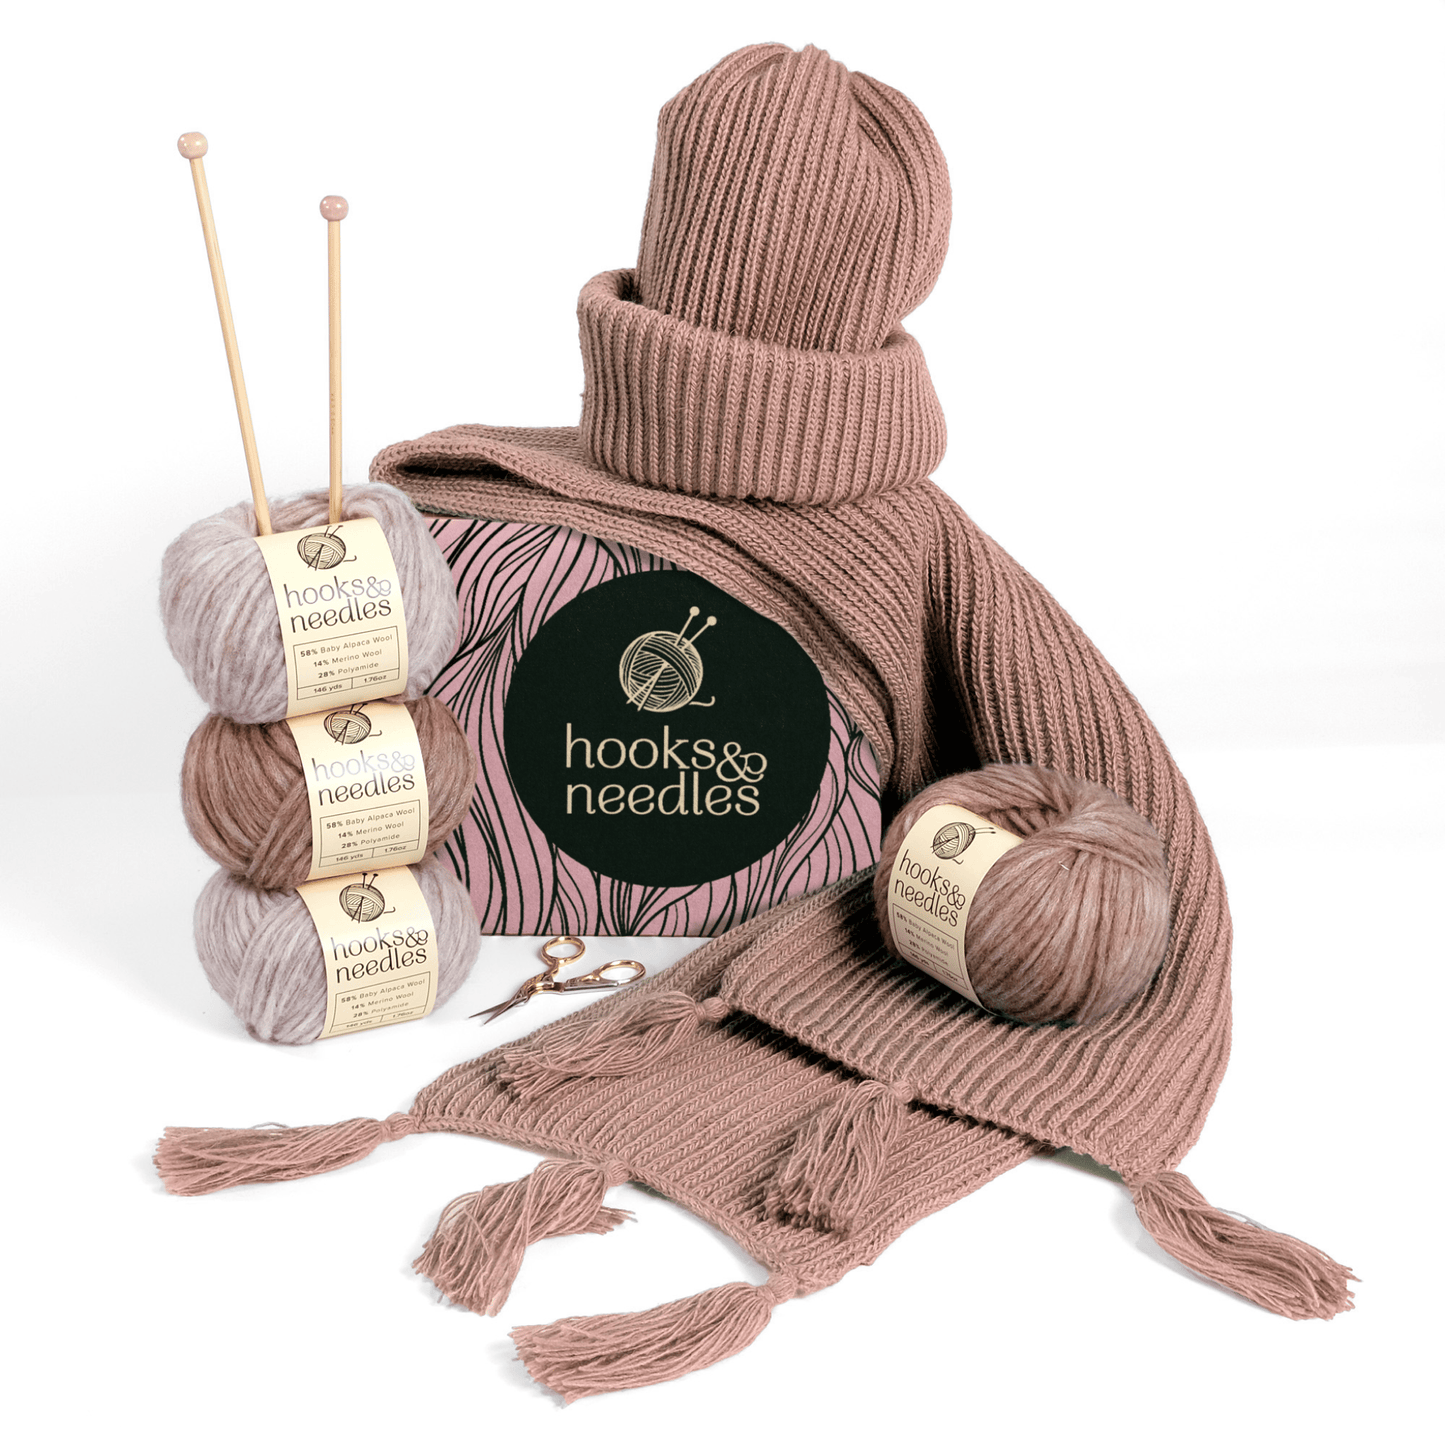 Knitting materials including mauve yarn balls, knitting needles, and a finished scarf and hat, with a 6-Month-Prepaid Hooks & Needles Subscription Box #13 logo.